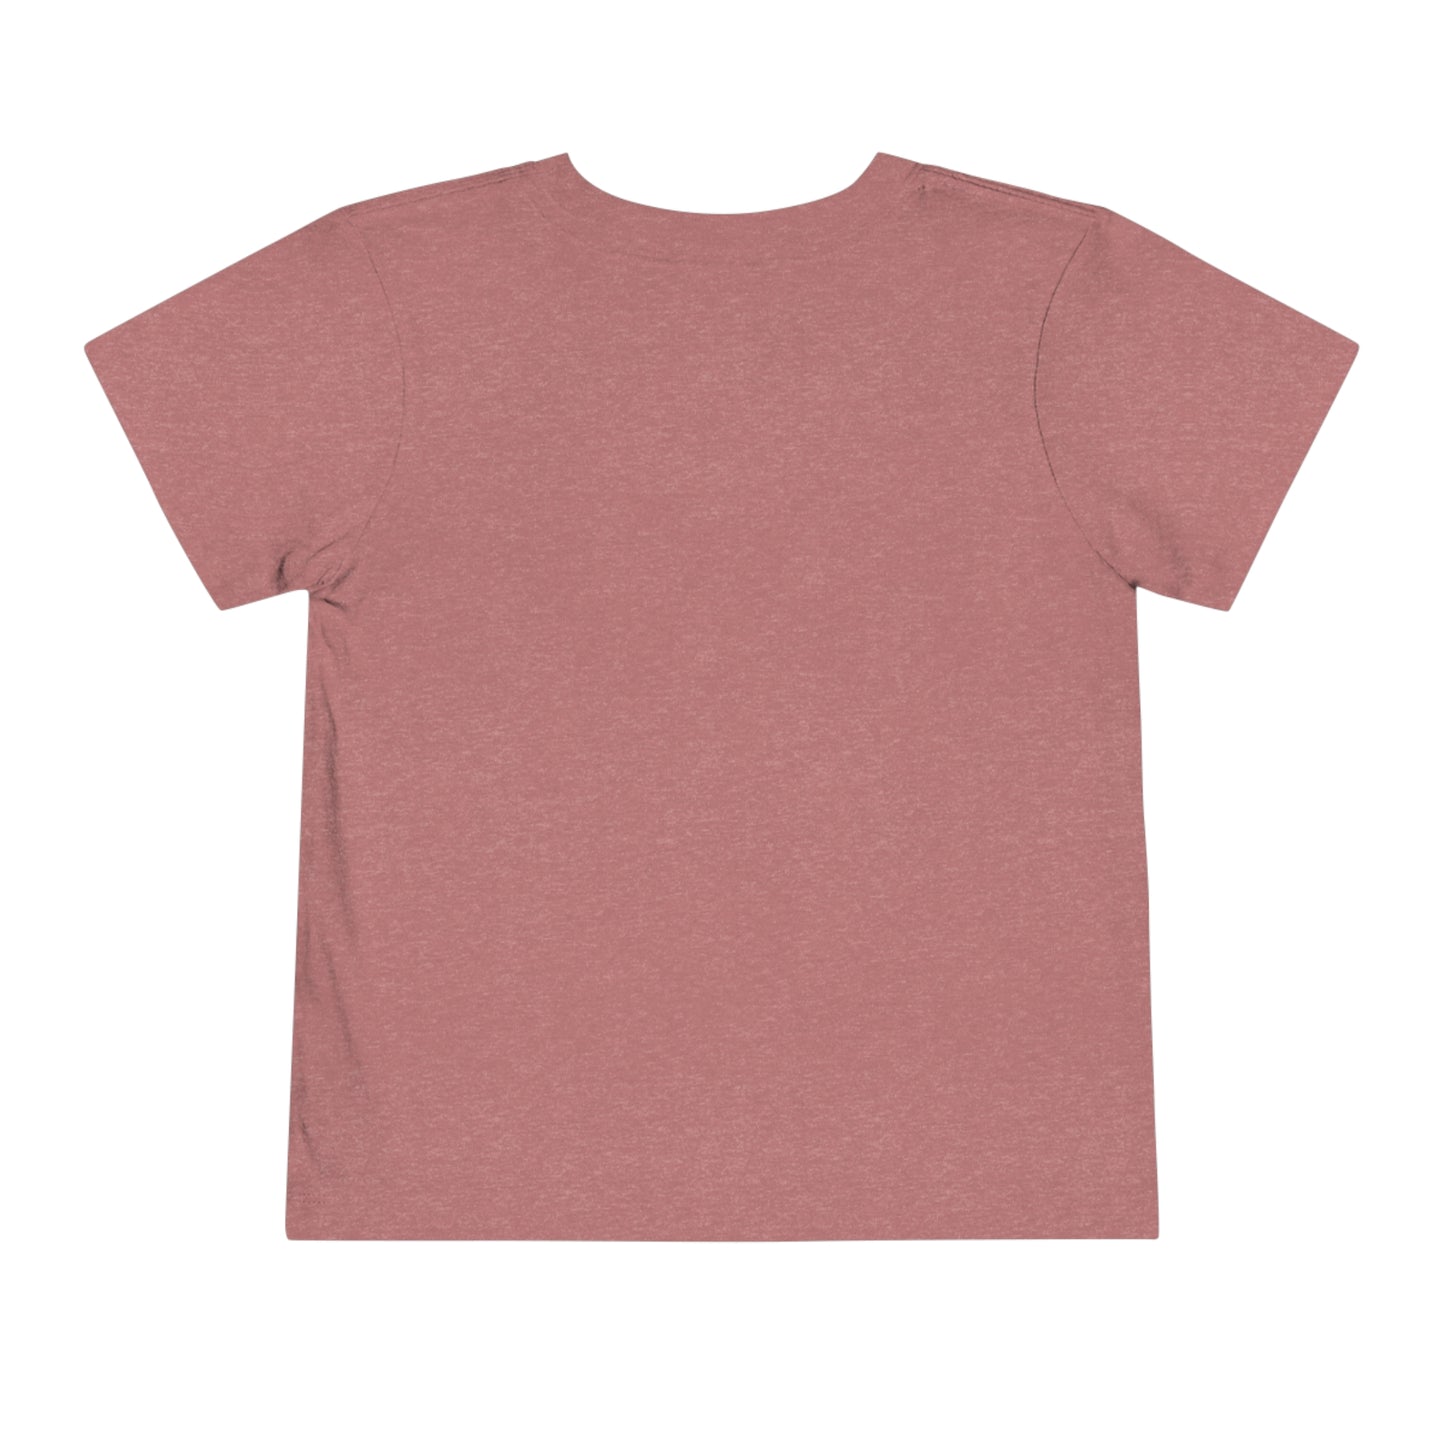 Flat back view of the Heather Mauve shirt